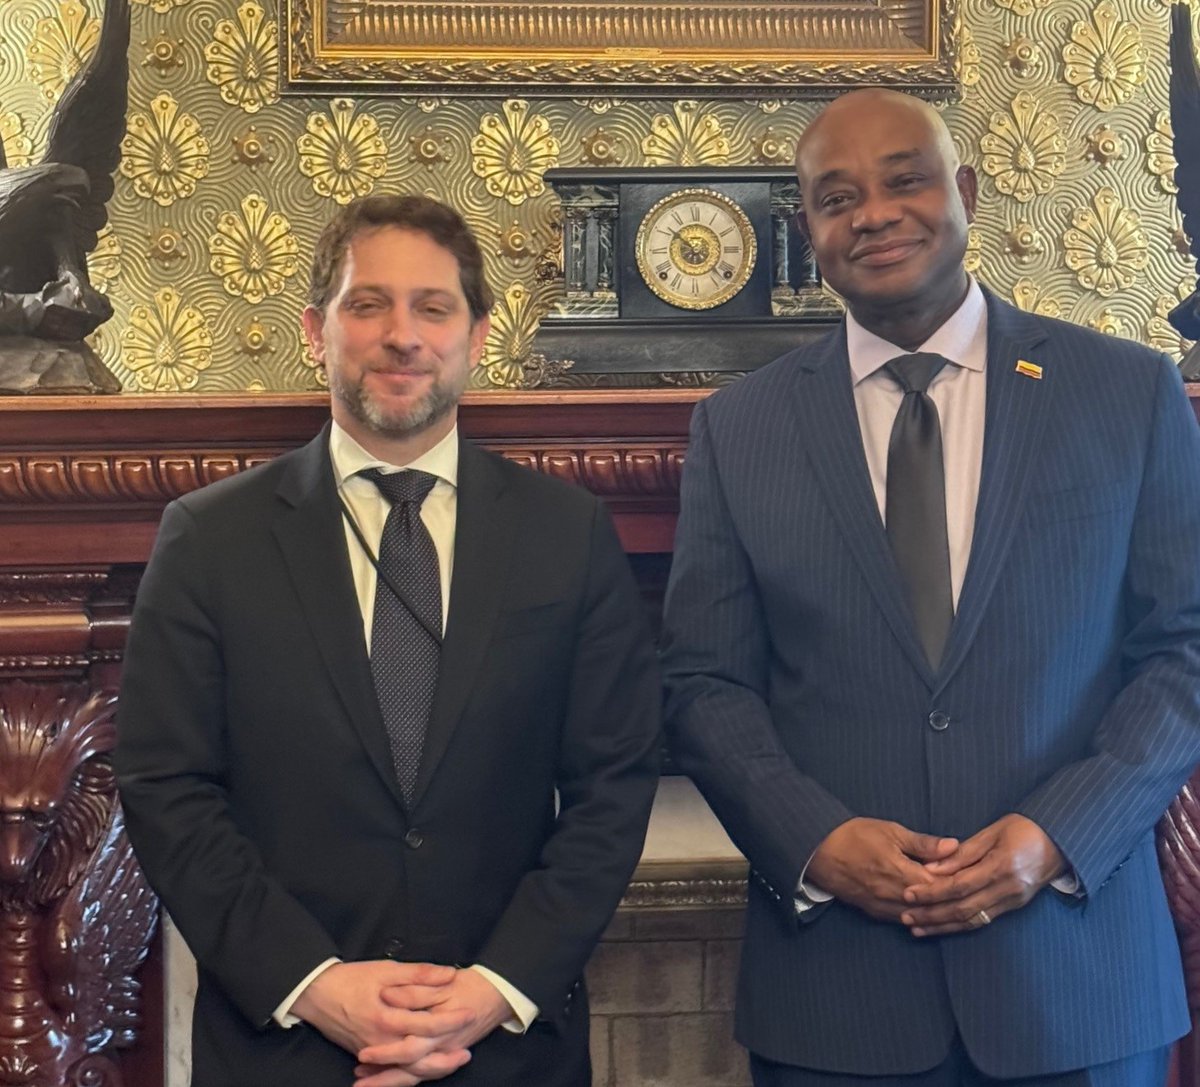 Principal Deputy National Security Advisor Jon Finer was pleased to meet with our close partner, Colombian Minister Murillo @LuisGMurillo, & his delegation to discuss our collaboration on migration, peace & security, and review regional developments.